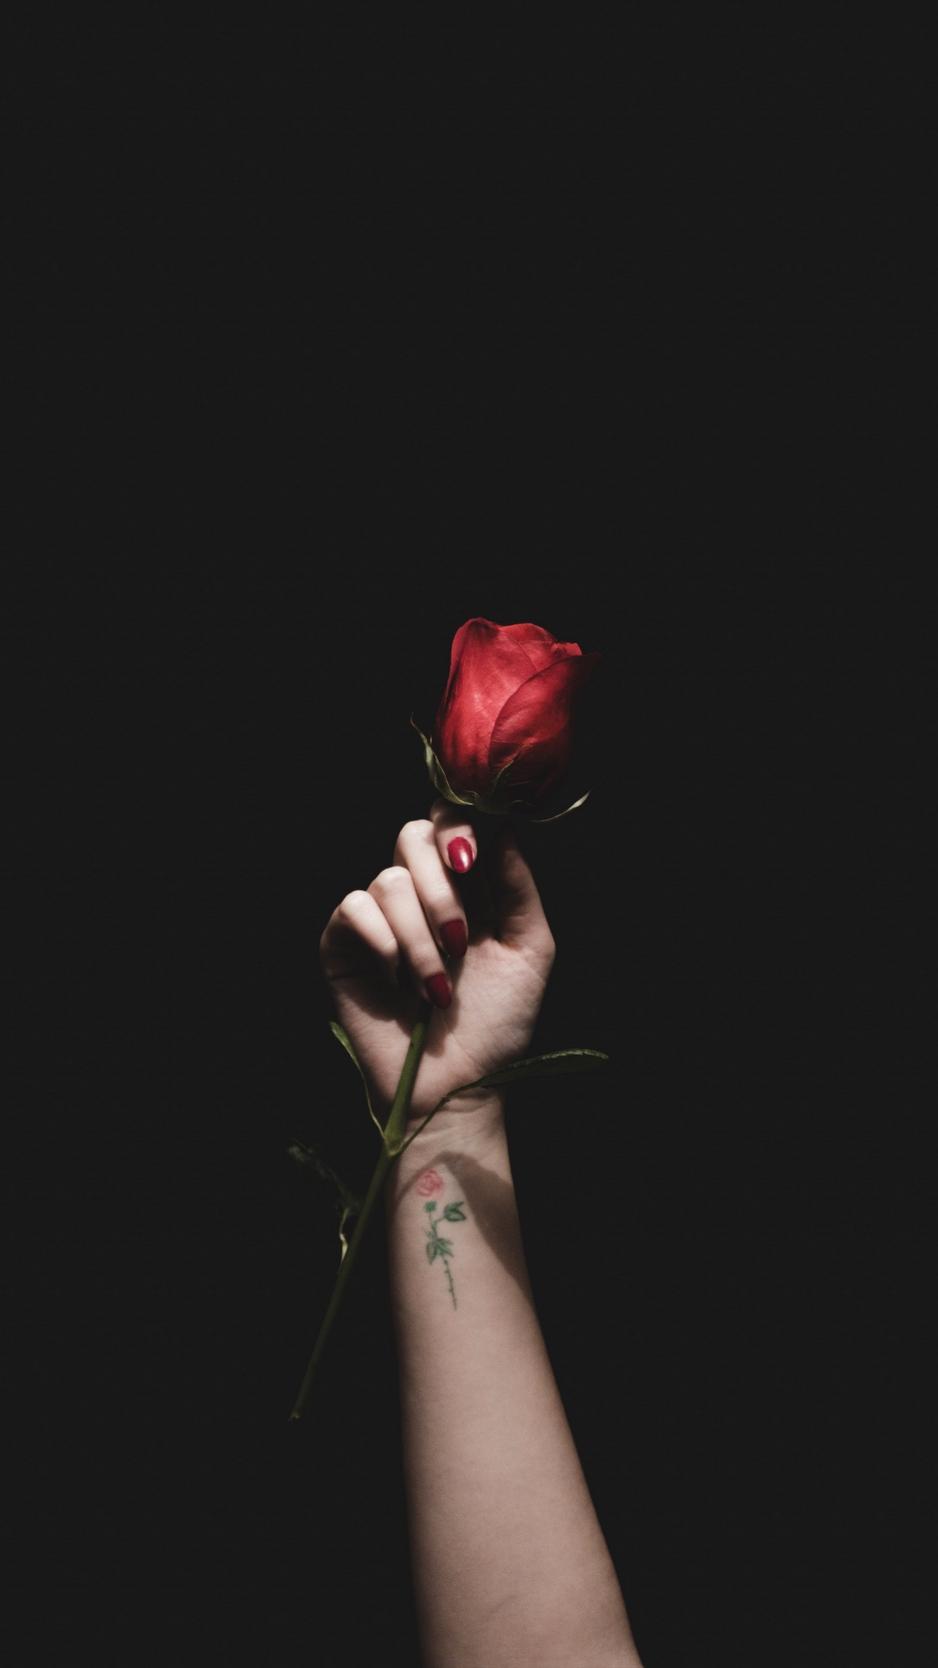 Download wallpaper 938x1668 rose, red, hand, tattoo iphone 8